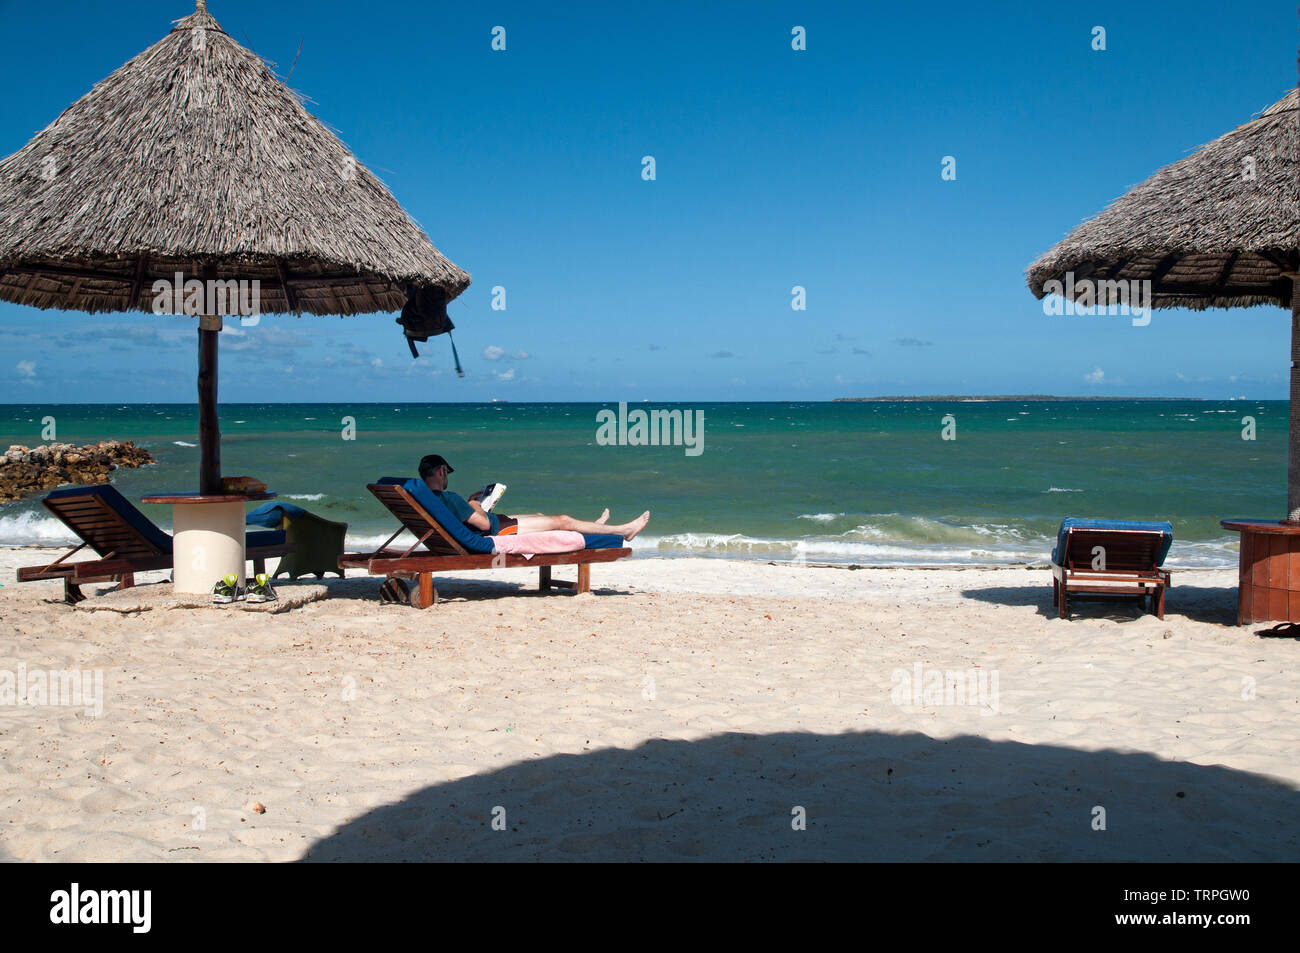 A relaxing tourist is reading a book by the side of sea beach in Dares Salaam,Africa, stretching his legs on an easy chair with his shoes off. Stock Photo